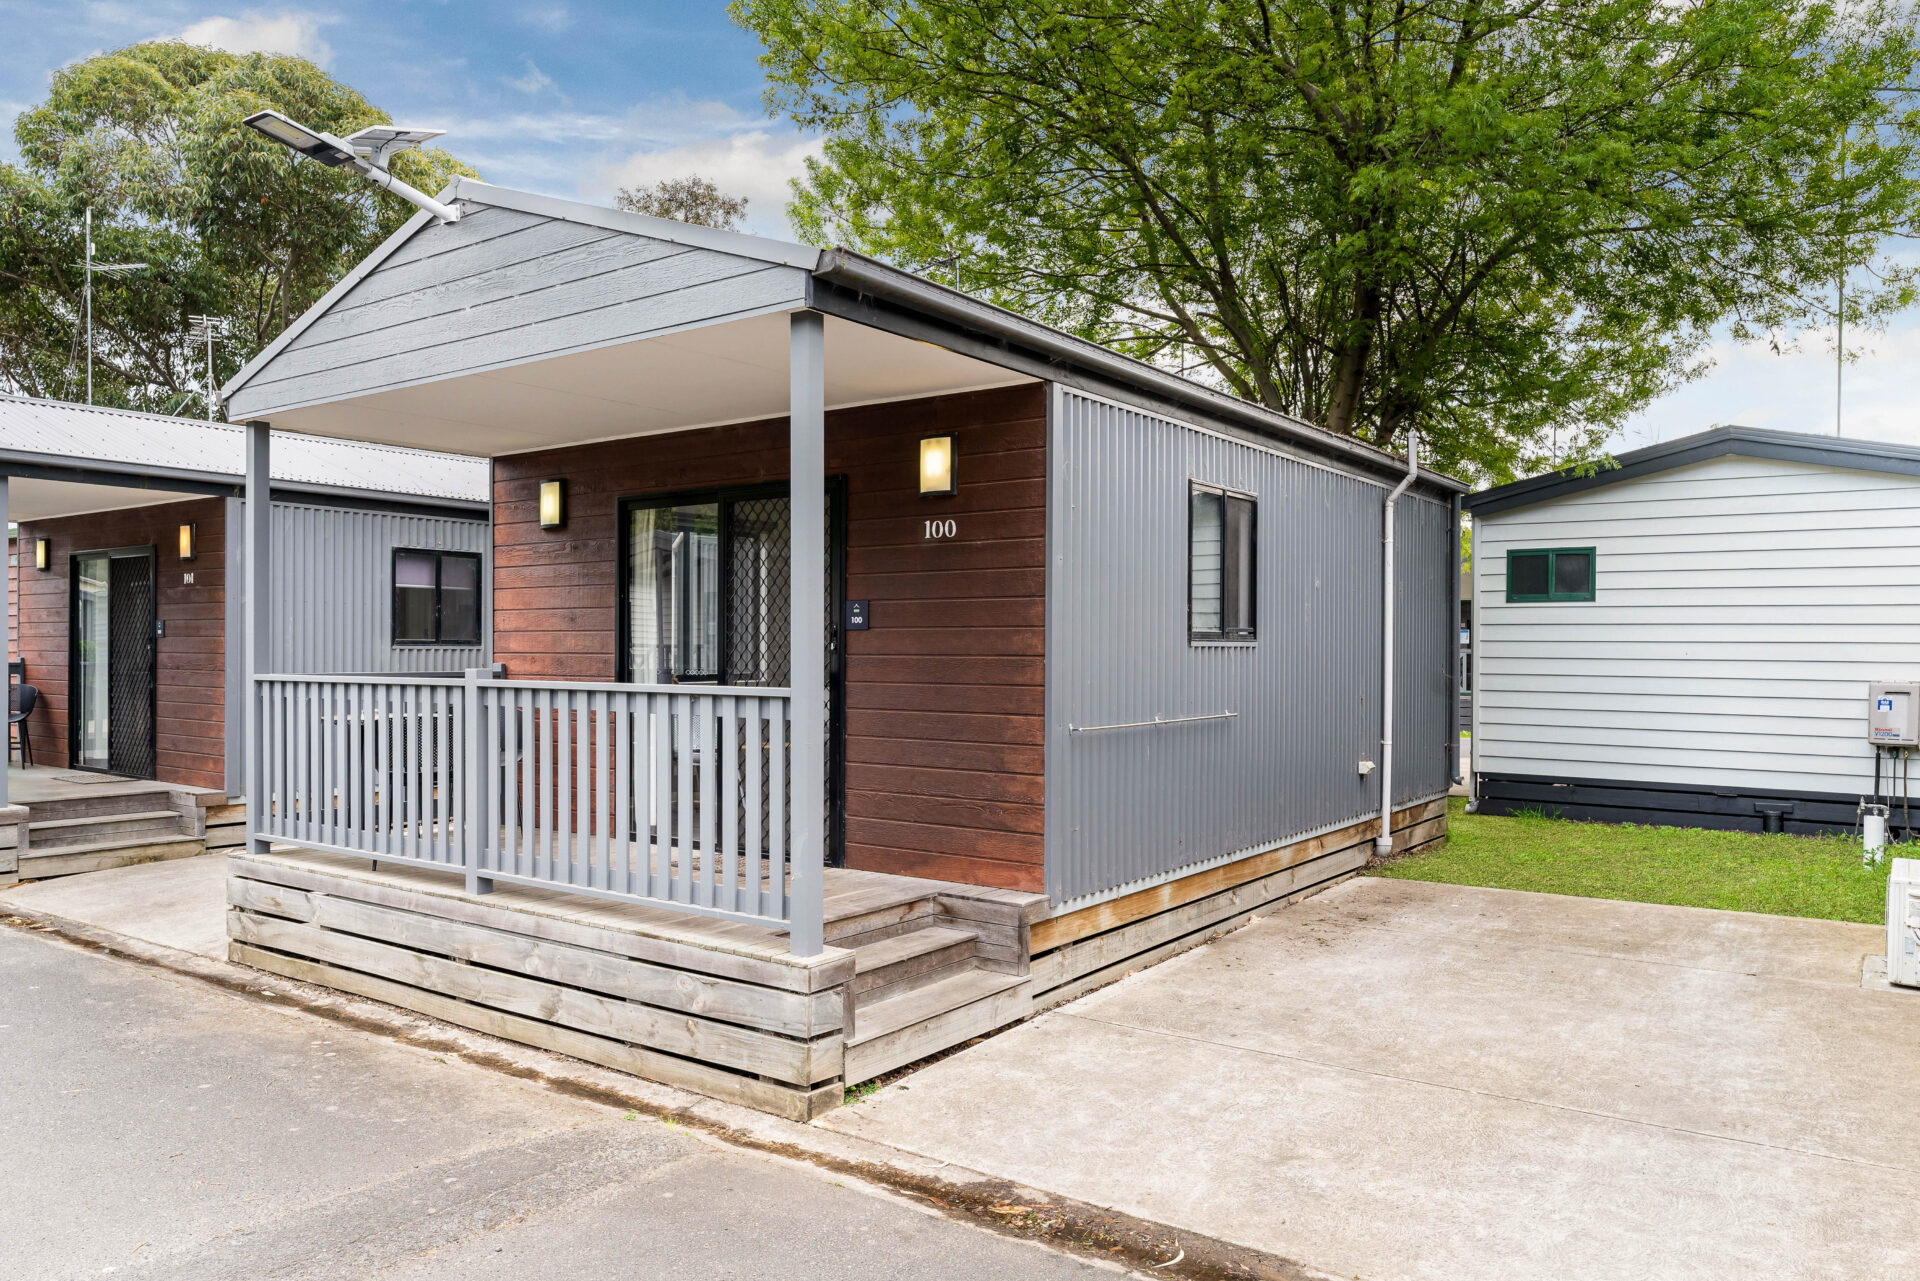 Exterior of one bedroom cabin deluxe | Tasman Holiday Parks Geelong